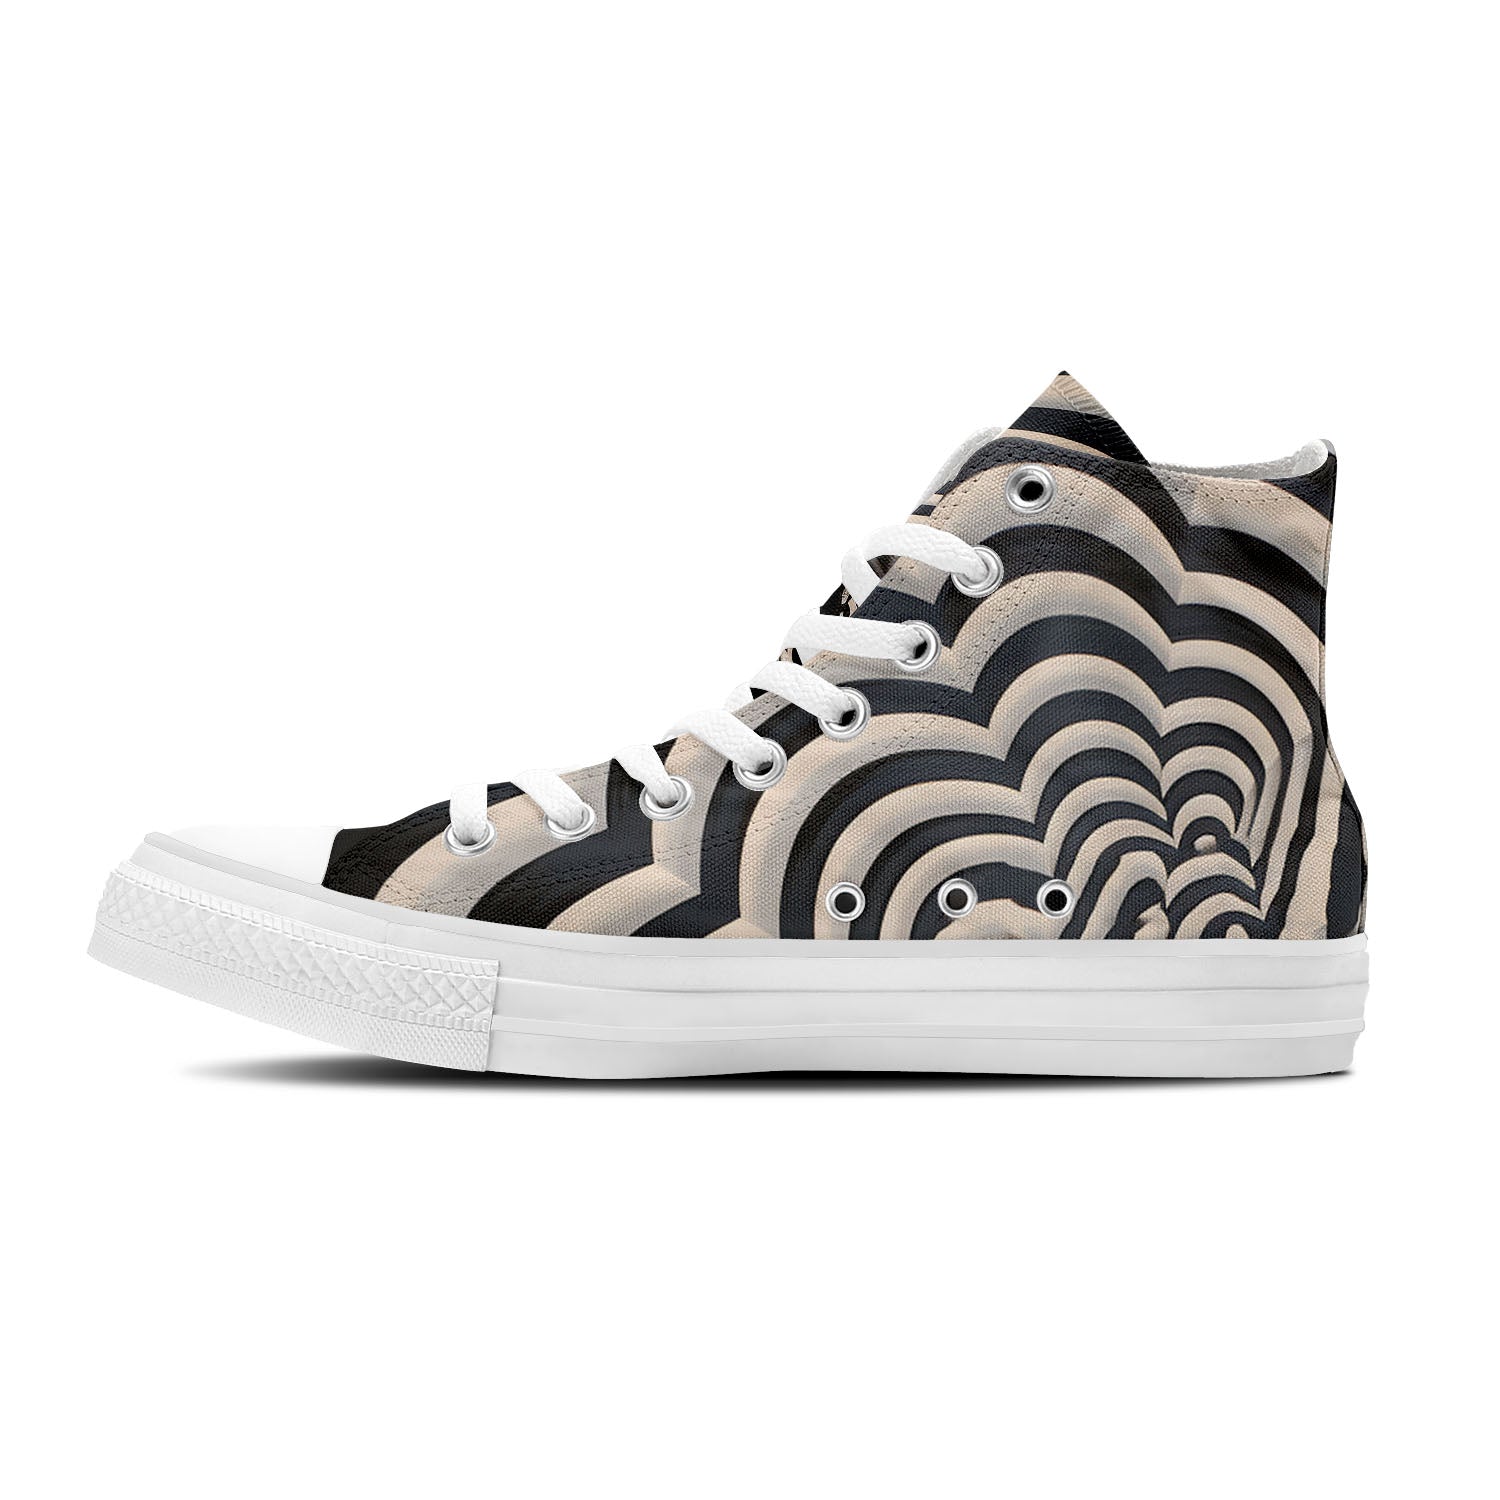 Canine Canvas: Men and Women's Mid-Top Canvas Shoes - Embrace the Artistry of Man's Best Friend with Op Art Dog Imagery